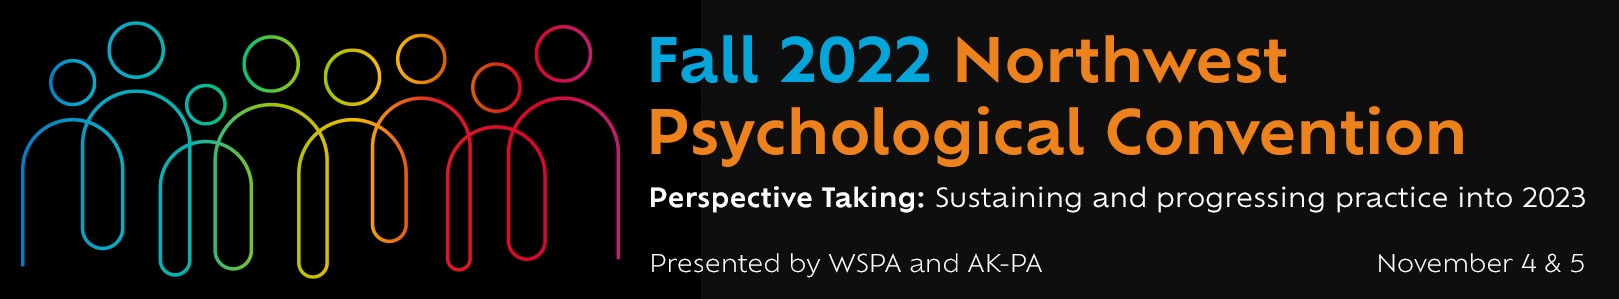 Join us at the 2022 Northwest Psychological Fall Convention.